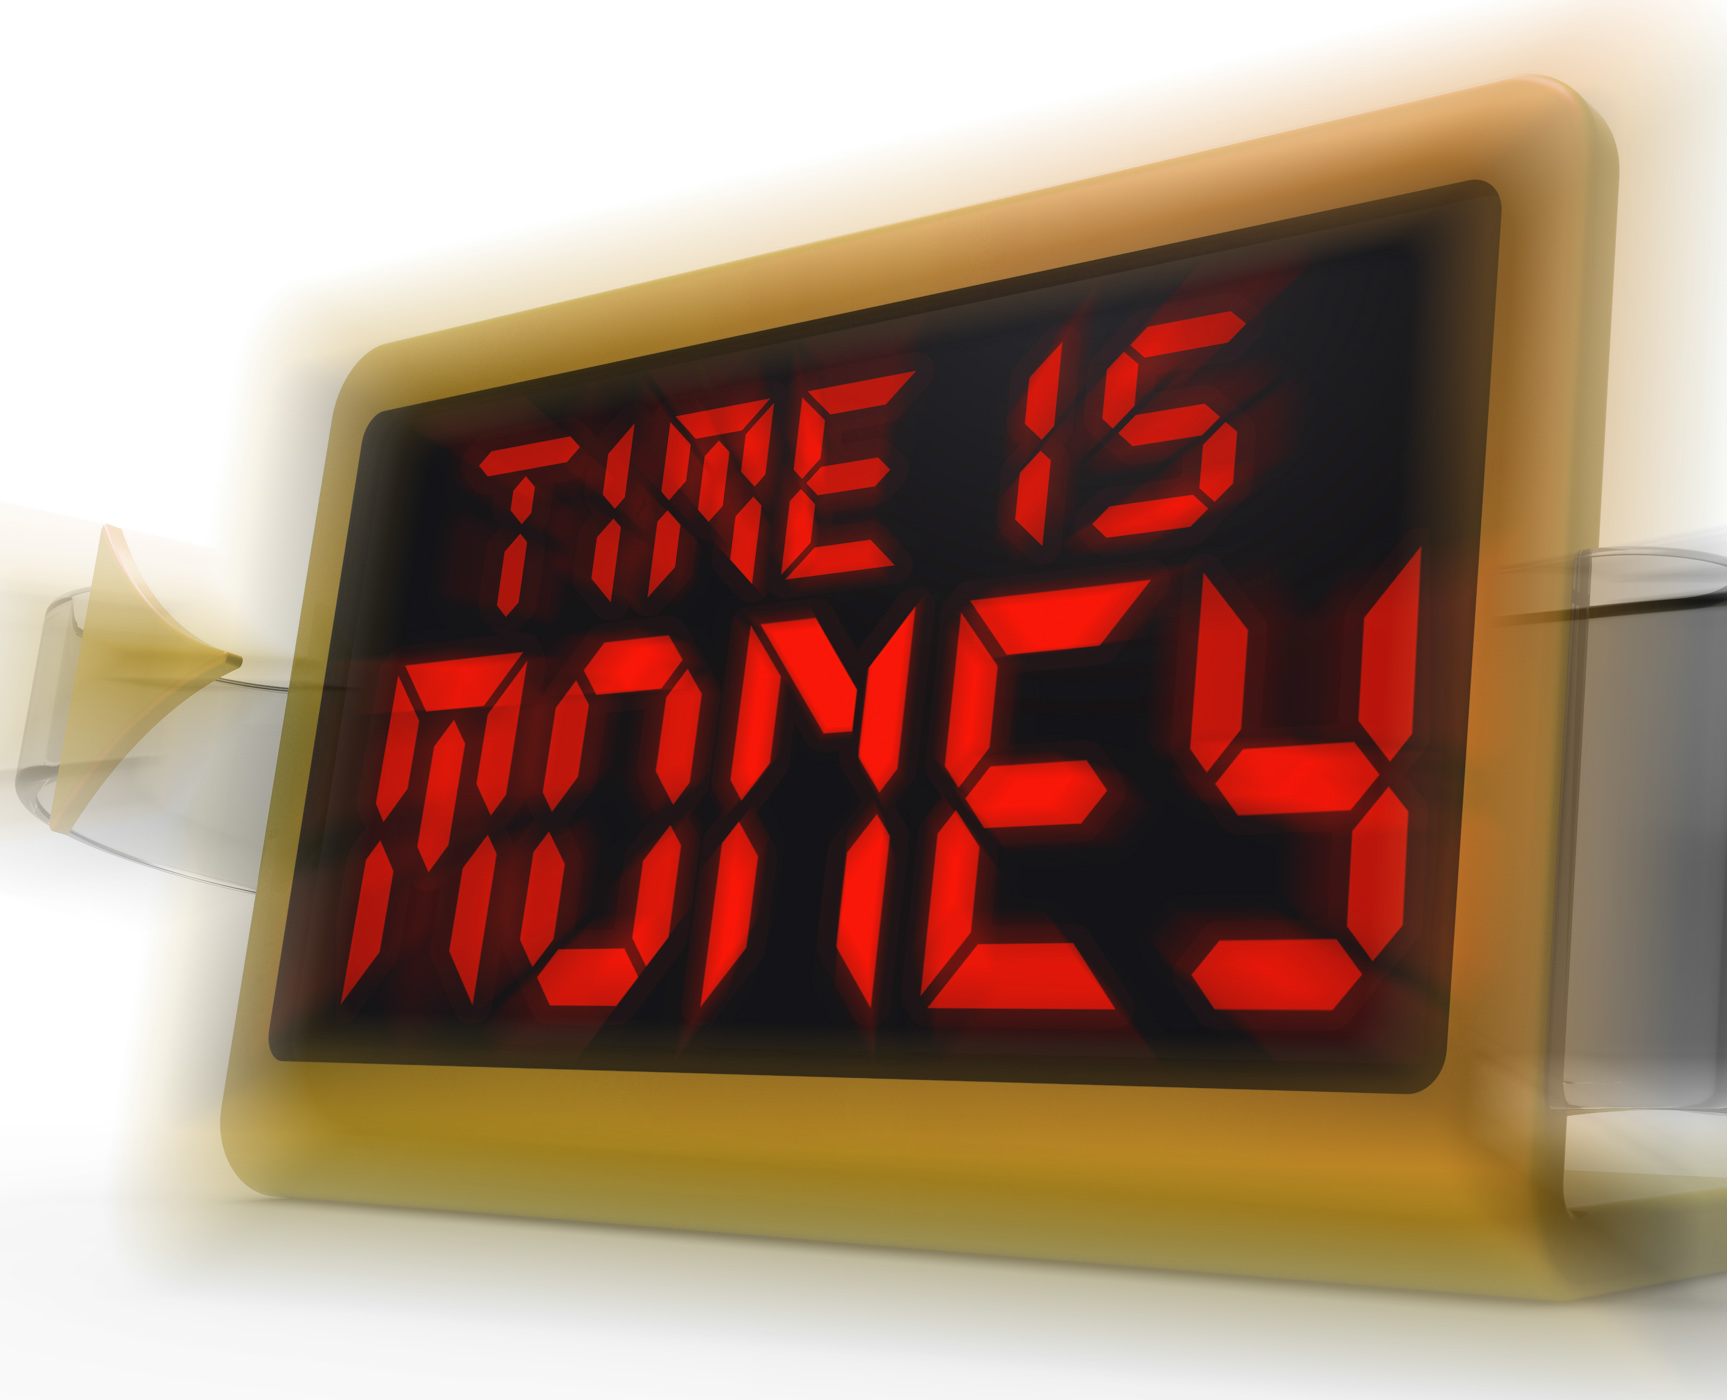 Time is money digital clock shows valuable and important resource photo